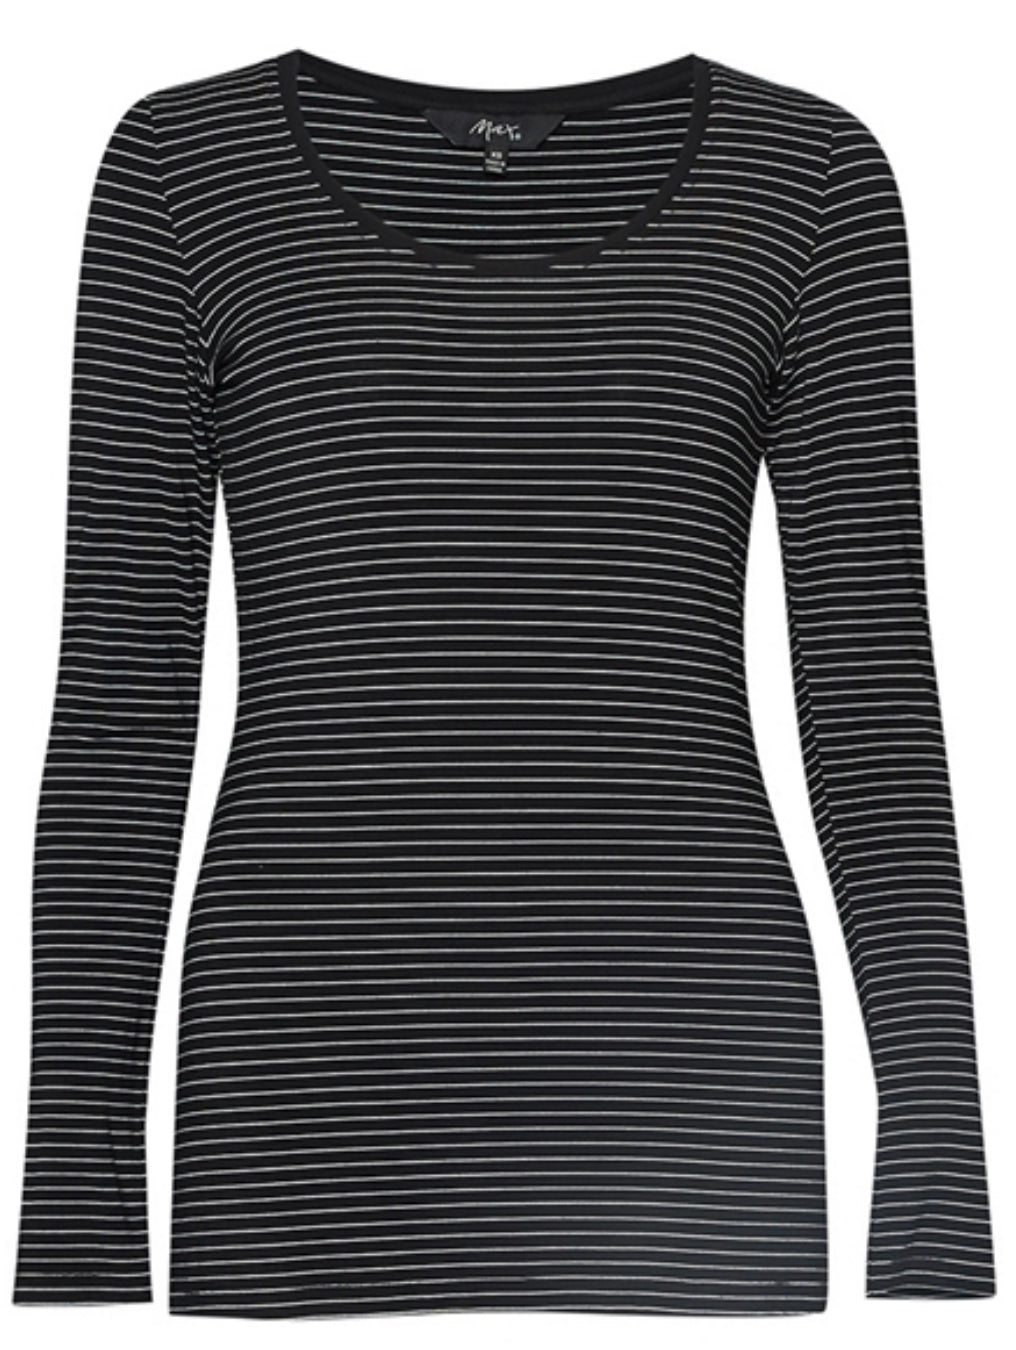 Max - Striped layering long sleeve top